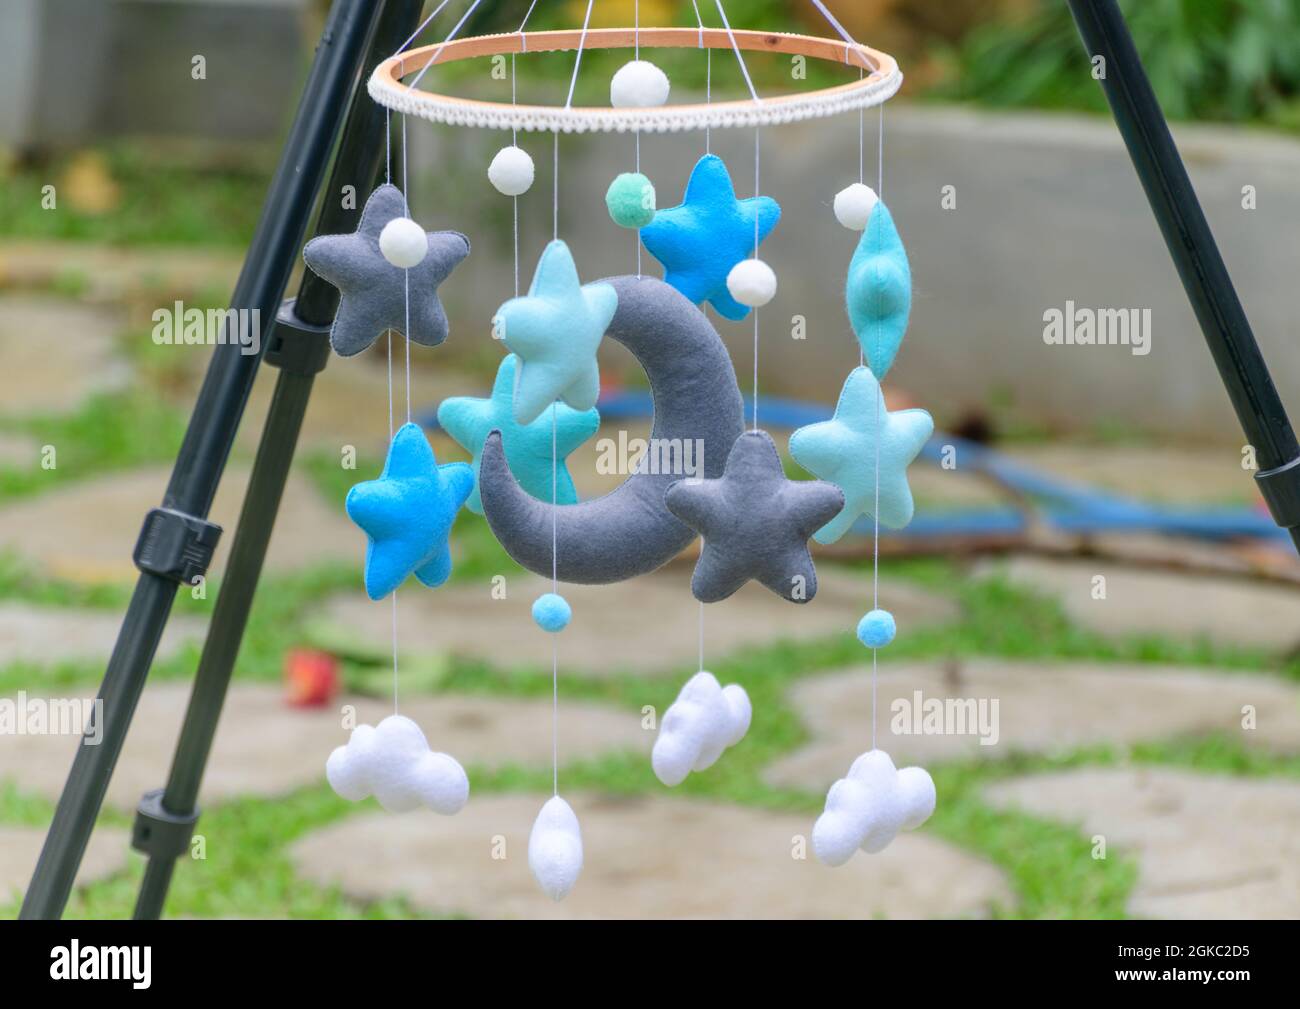 Baby cot mobile hangs from a camera tripod in the outdoor garden. Fluffy moon and star-shaped beautiful baby mobile. Stock Photo